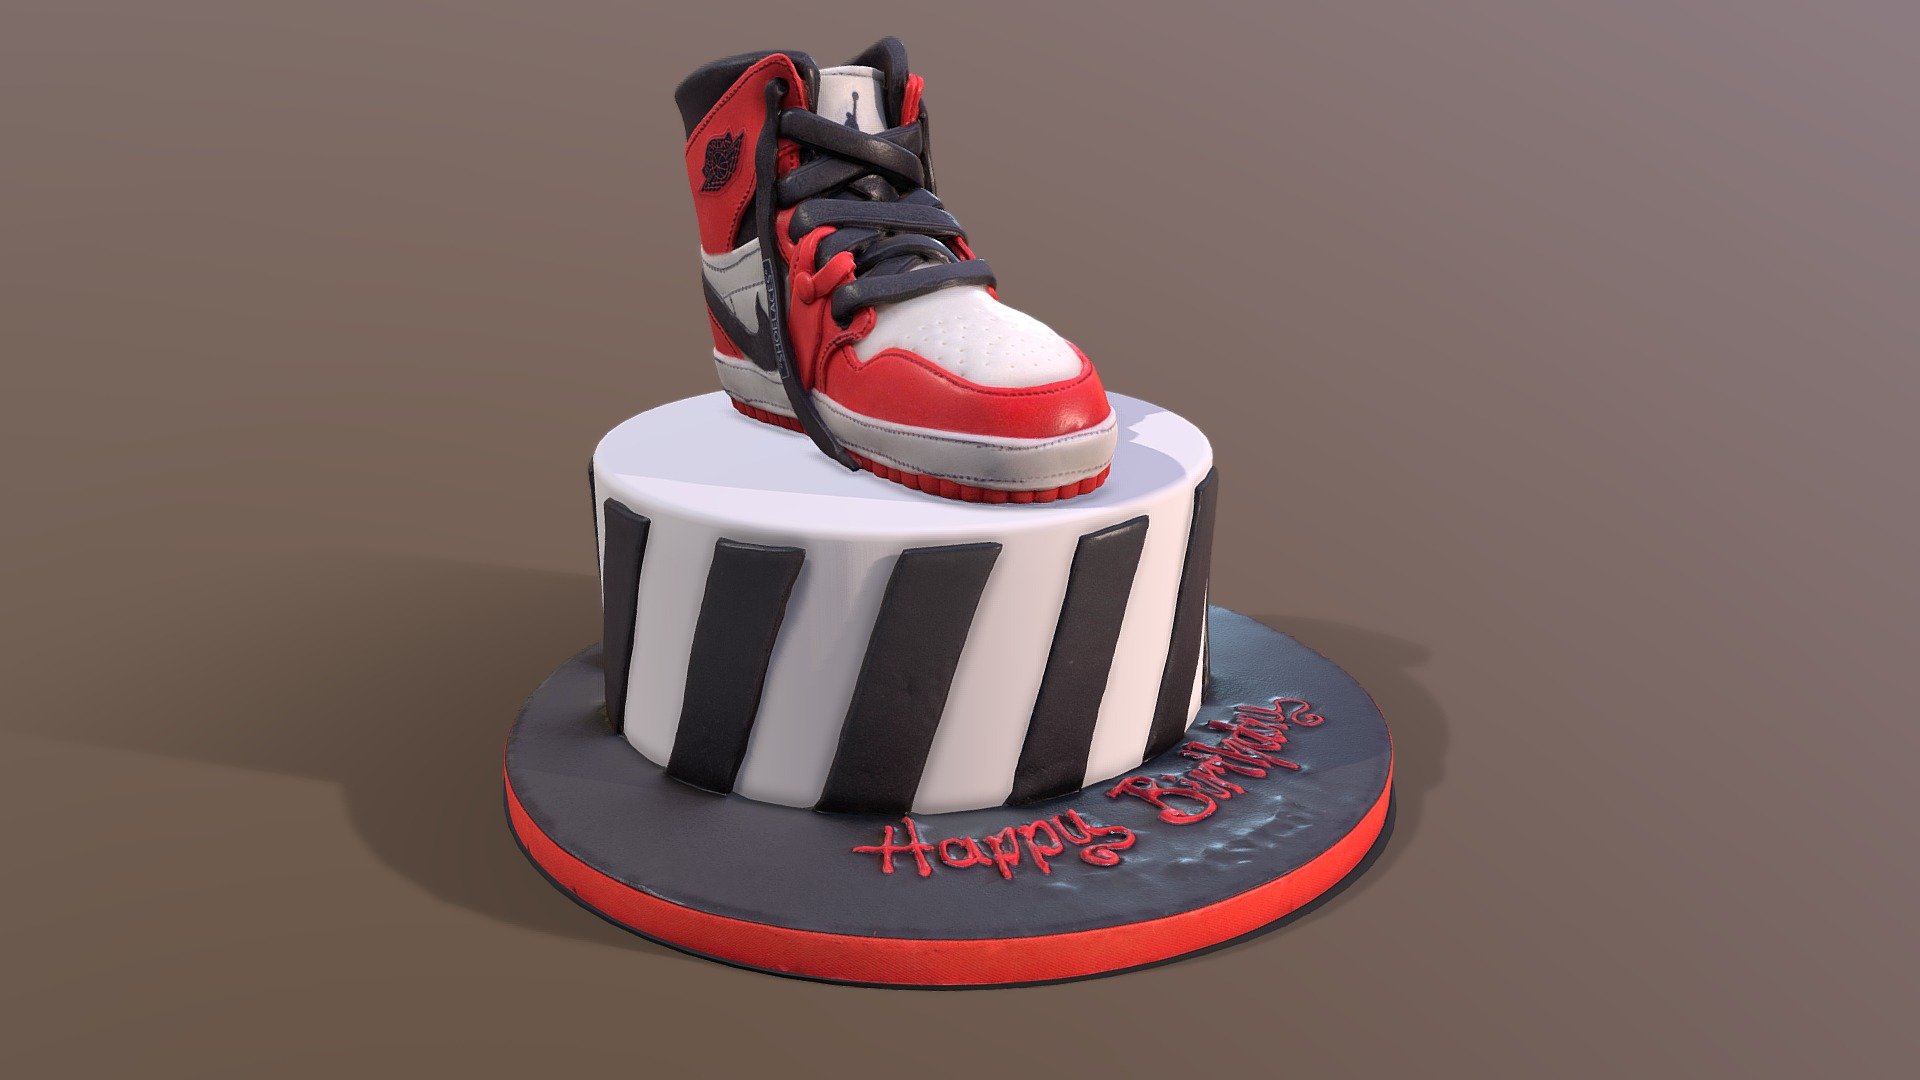 This legendery Jordan One Sneakers Cake model was created using photogrammetry which is made by CAKESBURG Premium Cake Shop in the UK. You can purchase real cake from this link: https://cakesburg.co.uk/products/nike-air-jordan-shoe-cake?_pos=1&amp;_sid=4687b8086&amp;_ss=r

Textures 2X 4096*4096px PBR photoscan-based materials Base Color, Normal Map, Roughness) - Jordan Air One Sneakers Cake - Buy Royalty Free 3D model by Cakesburg Premium 3D Cake Shop (@Viscom_Cakesburg) 3d model